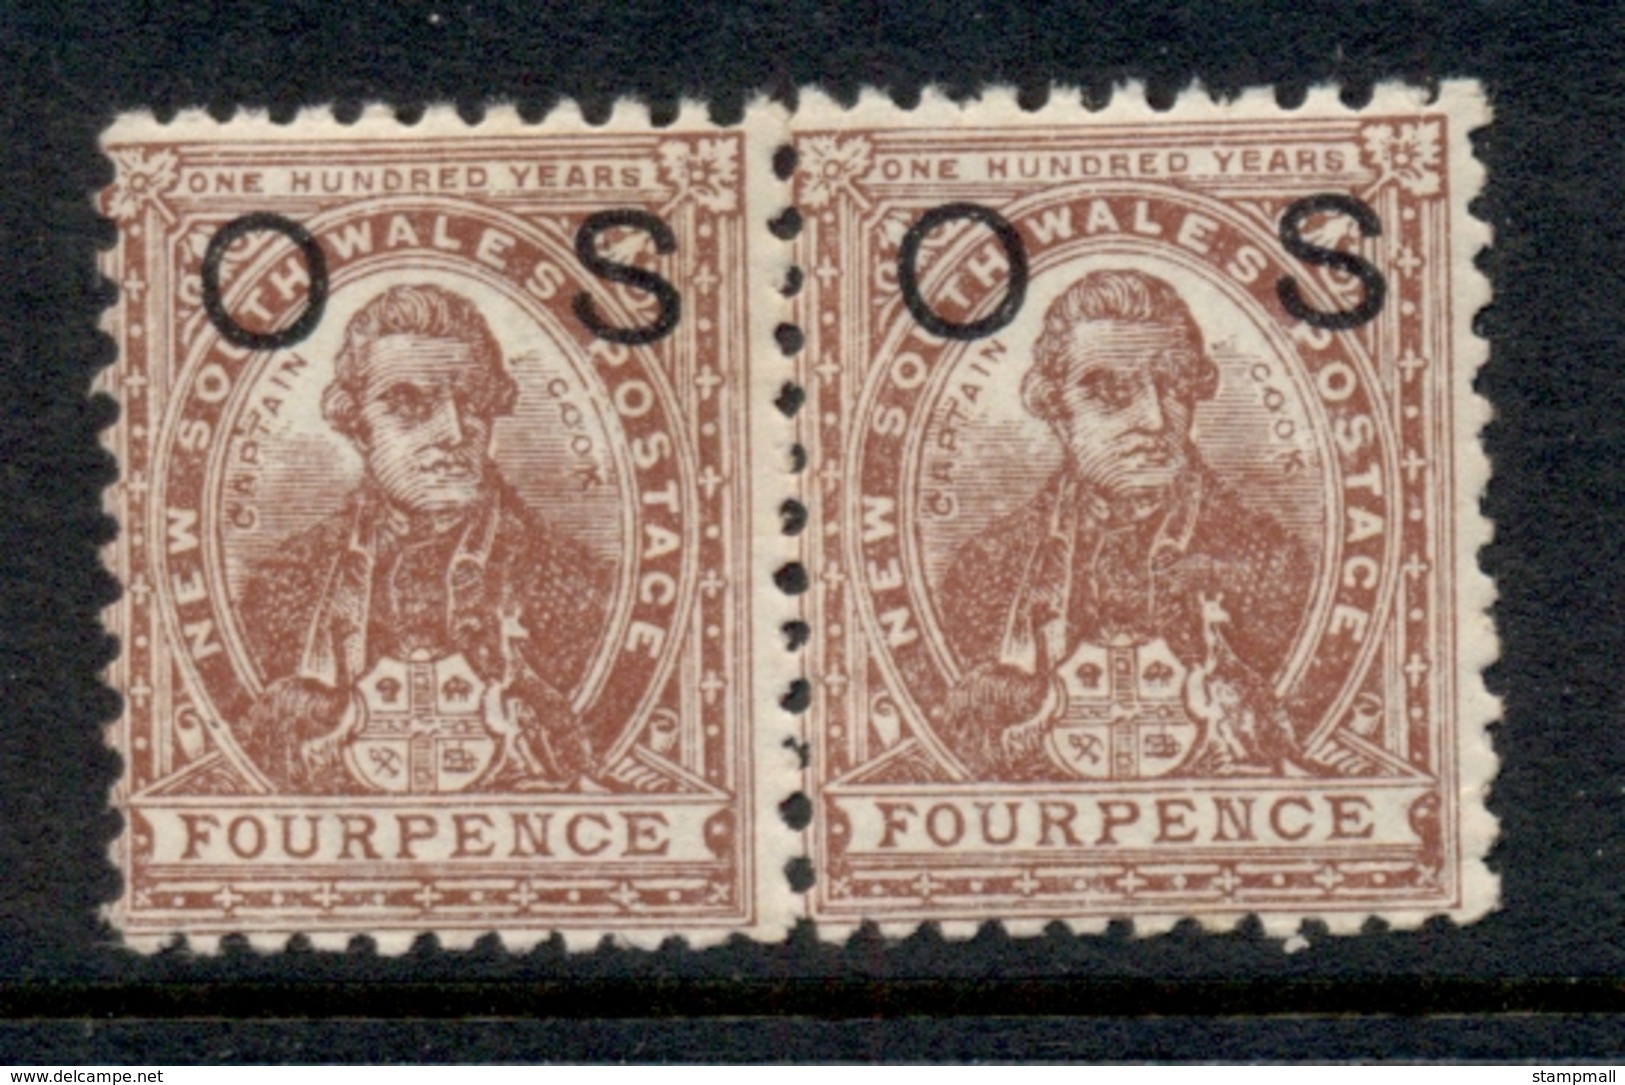 NSW 1888-89 Capt Cook 4d Red Brown Opt OS Pr MUH - Mint Stamps